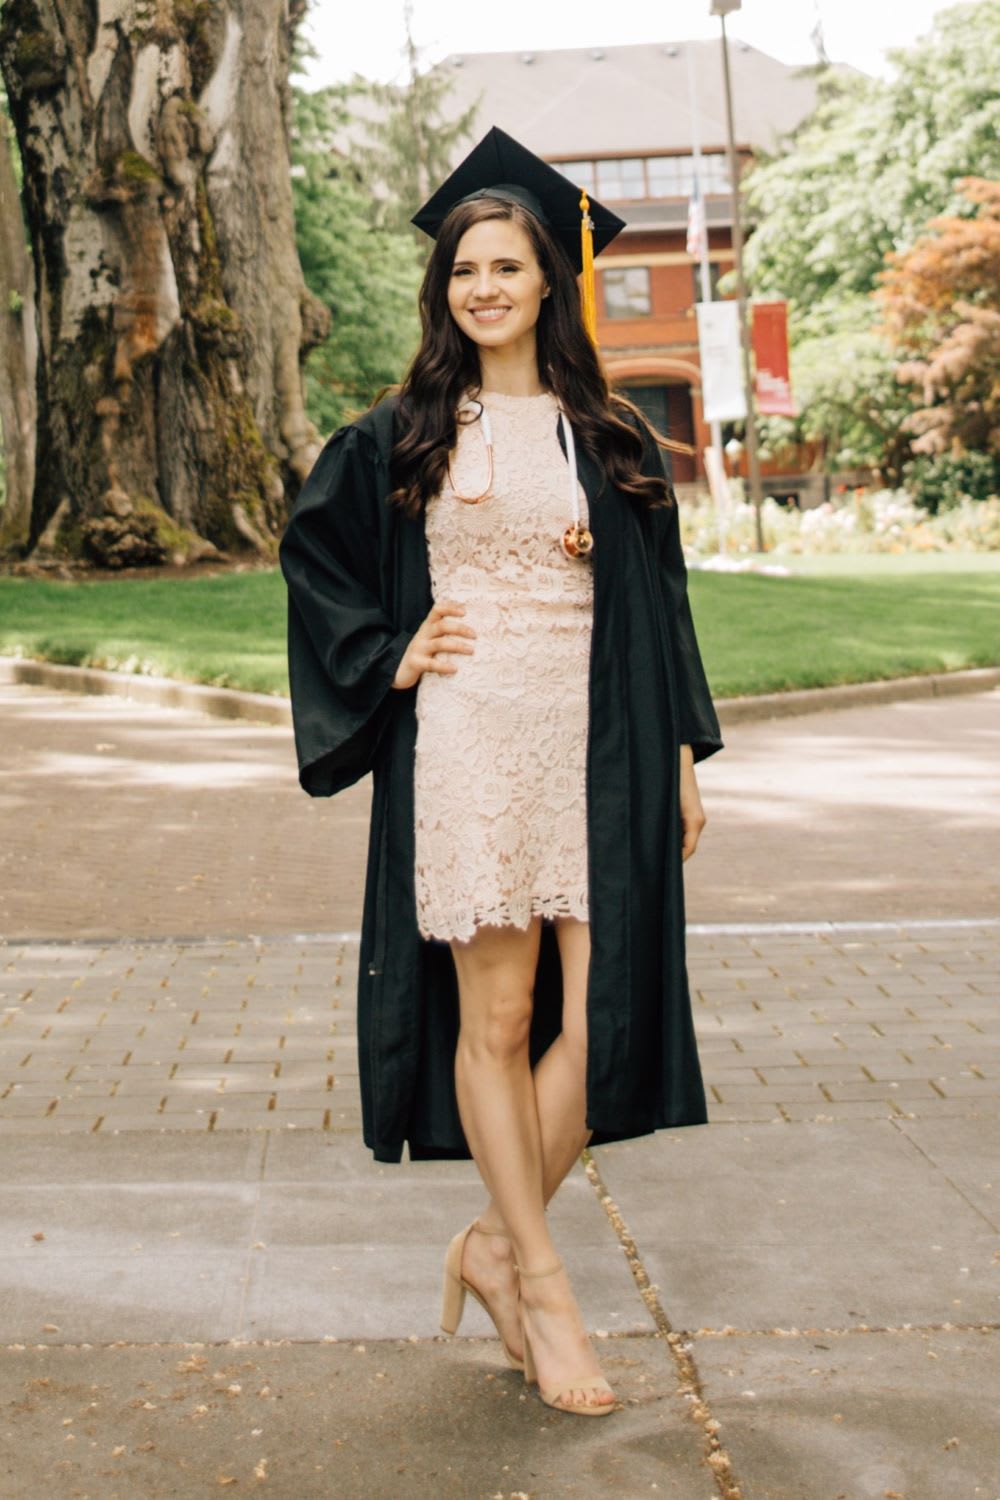 What Do You Wear To Graduation? Outfit Ideas To Inspire You On The Big ...